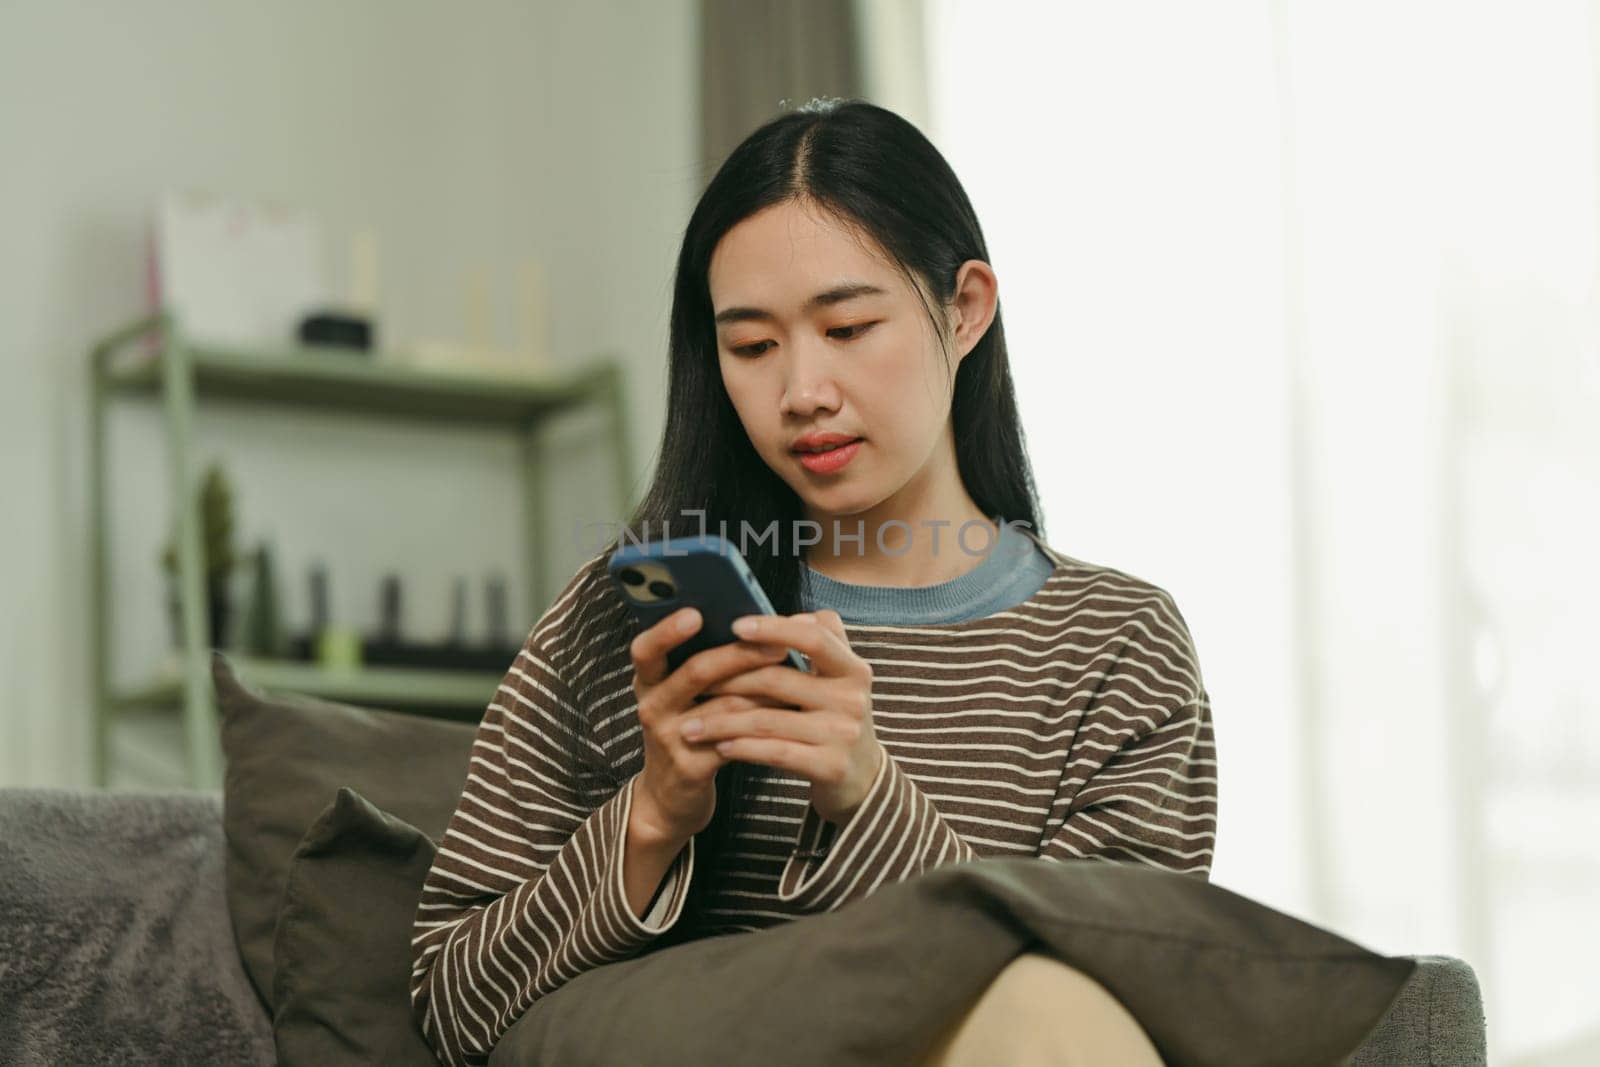 Beautiful young woman relaxing on comfortable sofa while chatting on mobile phone.